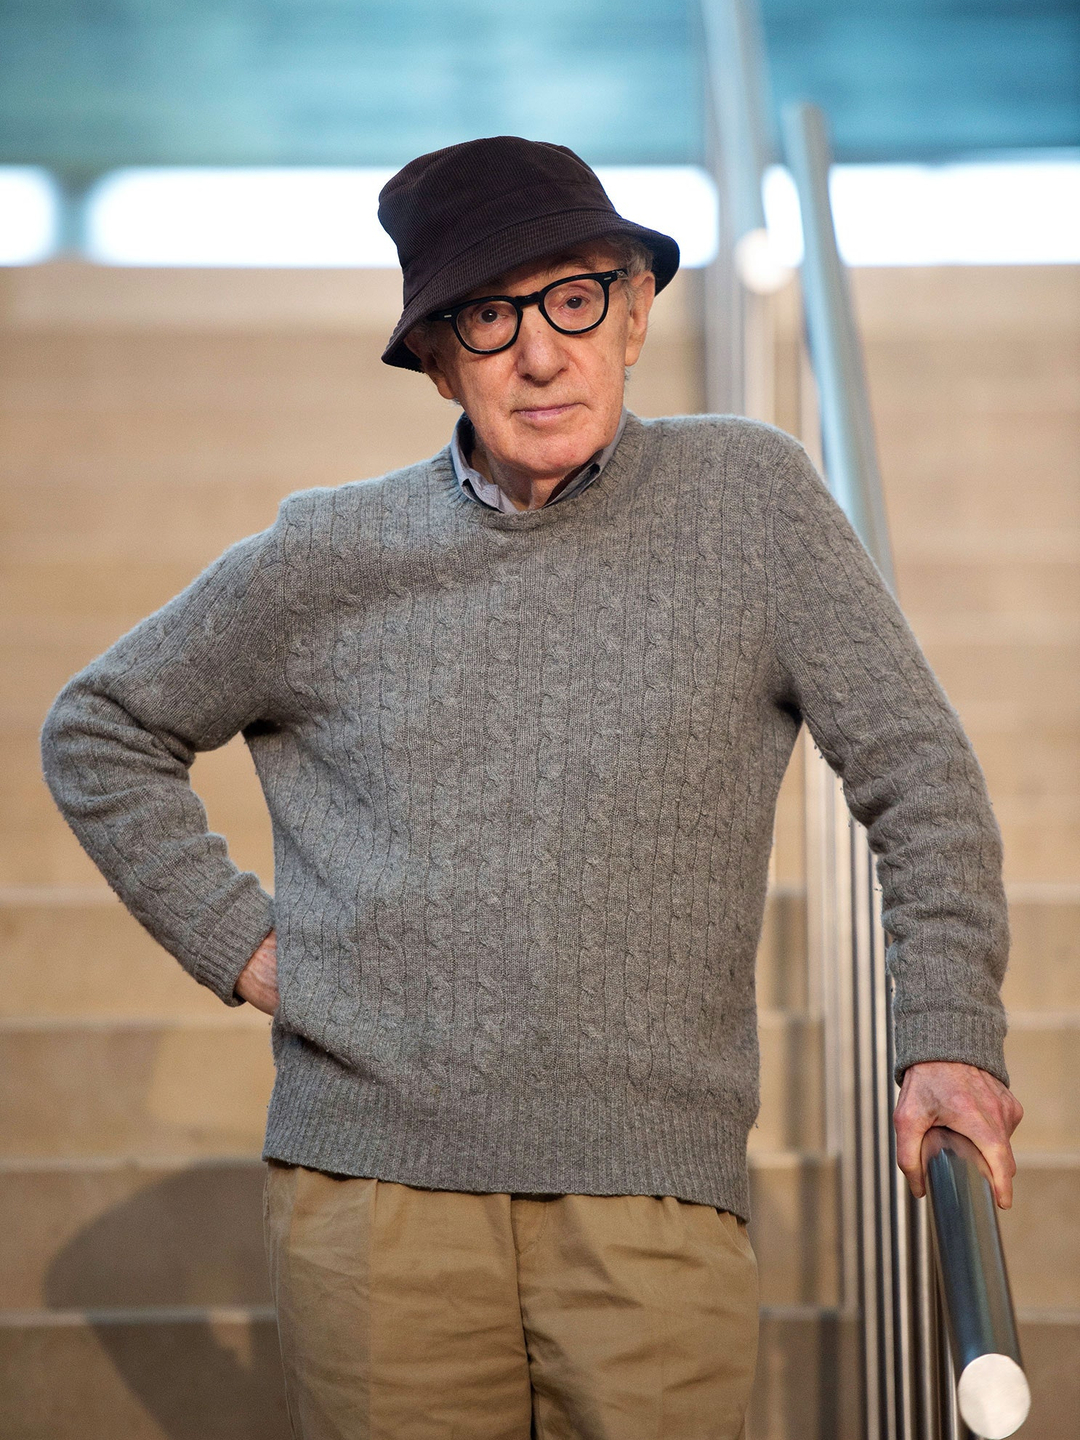 Woody Allen way to fame